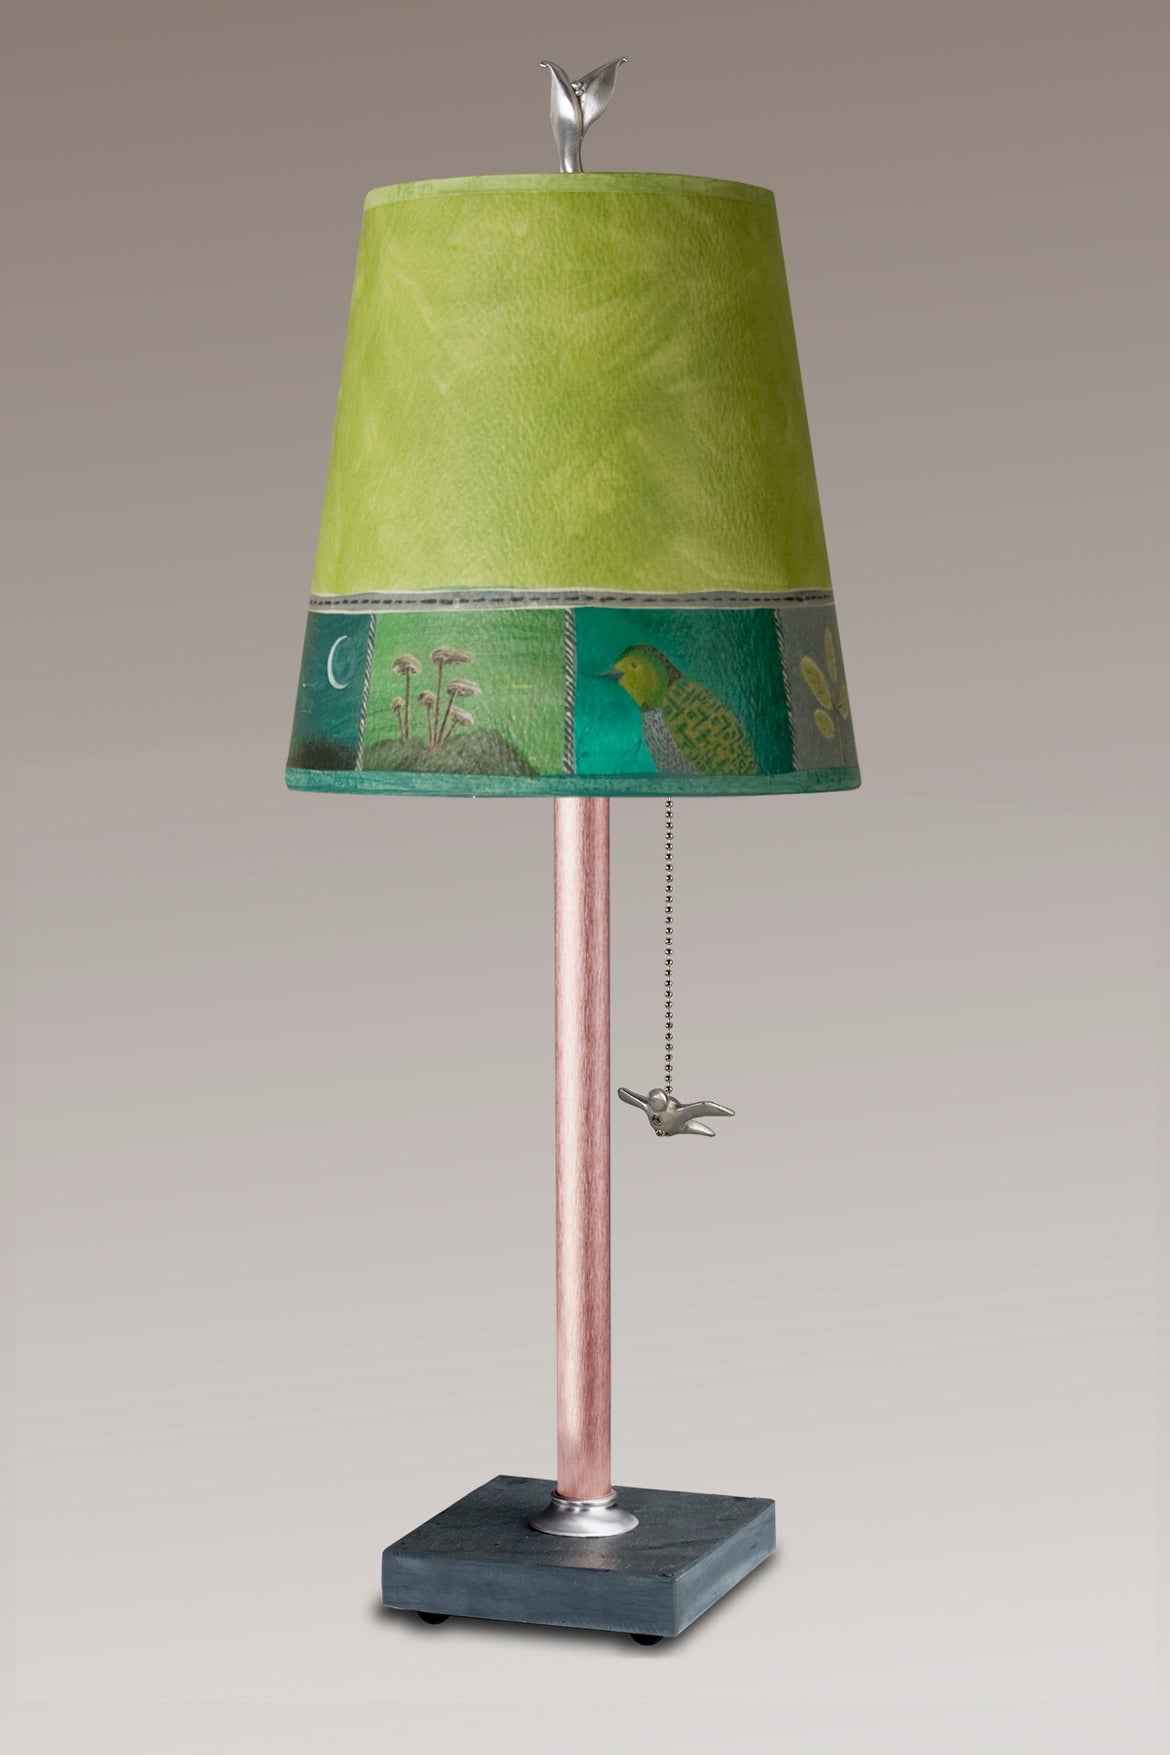 Janna Ugone & Co Table Lamps Copper Table Lamp with Small Drum in Woodland Trails in Leaf